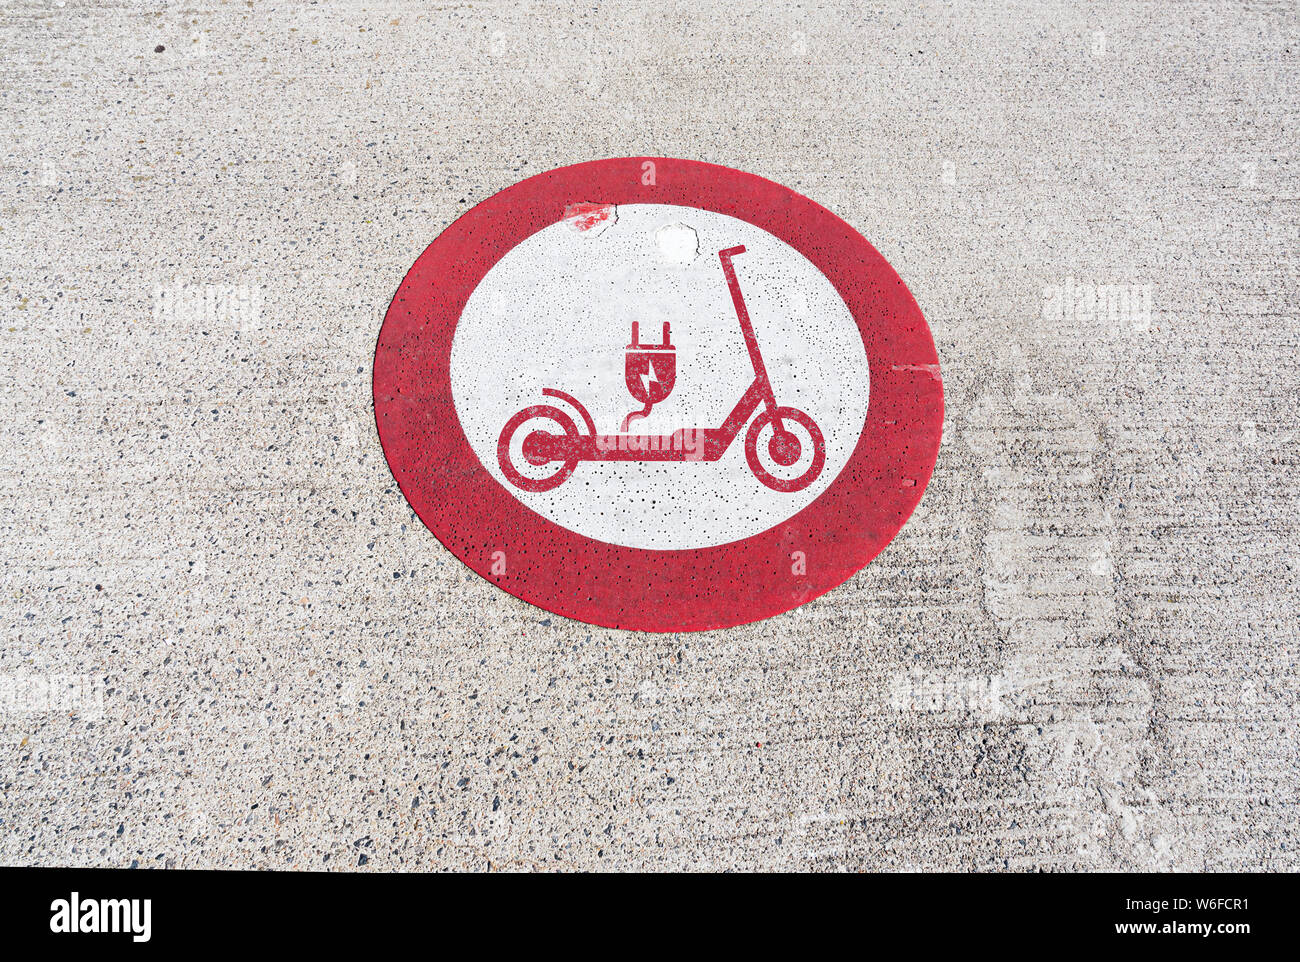 no electric scooters allowed prohibition sign on road pavement, e-scooters banned Stock Photo